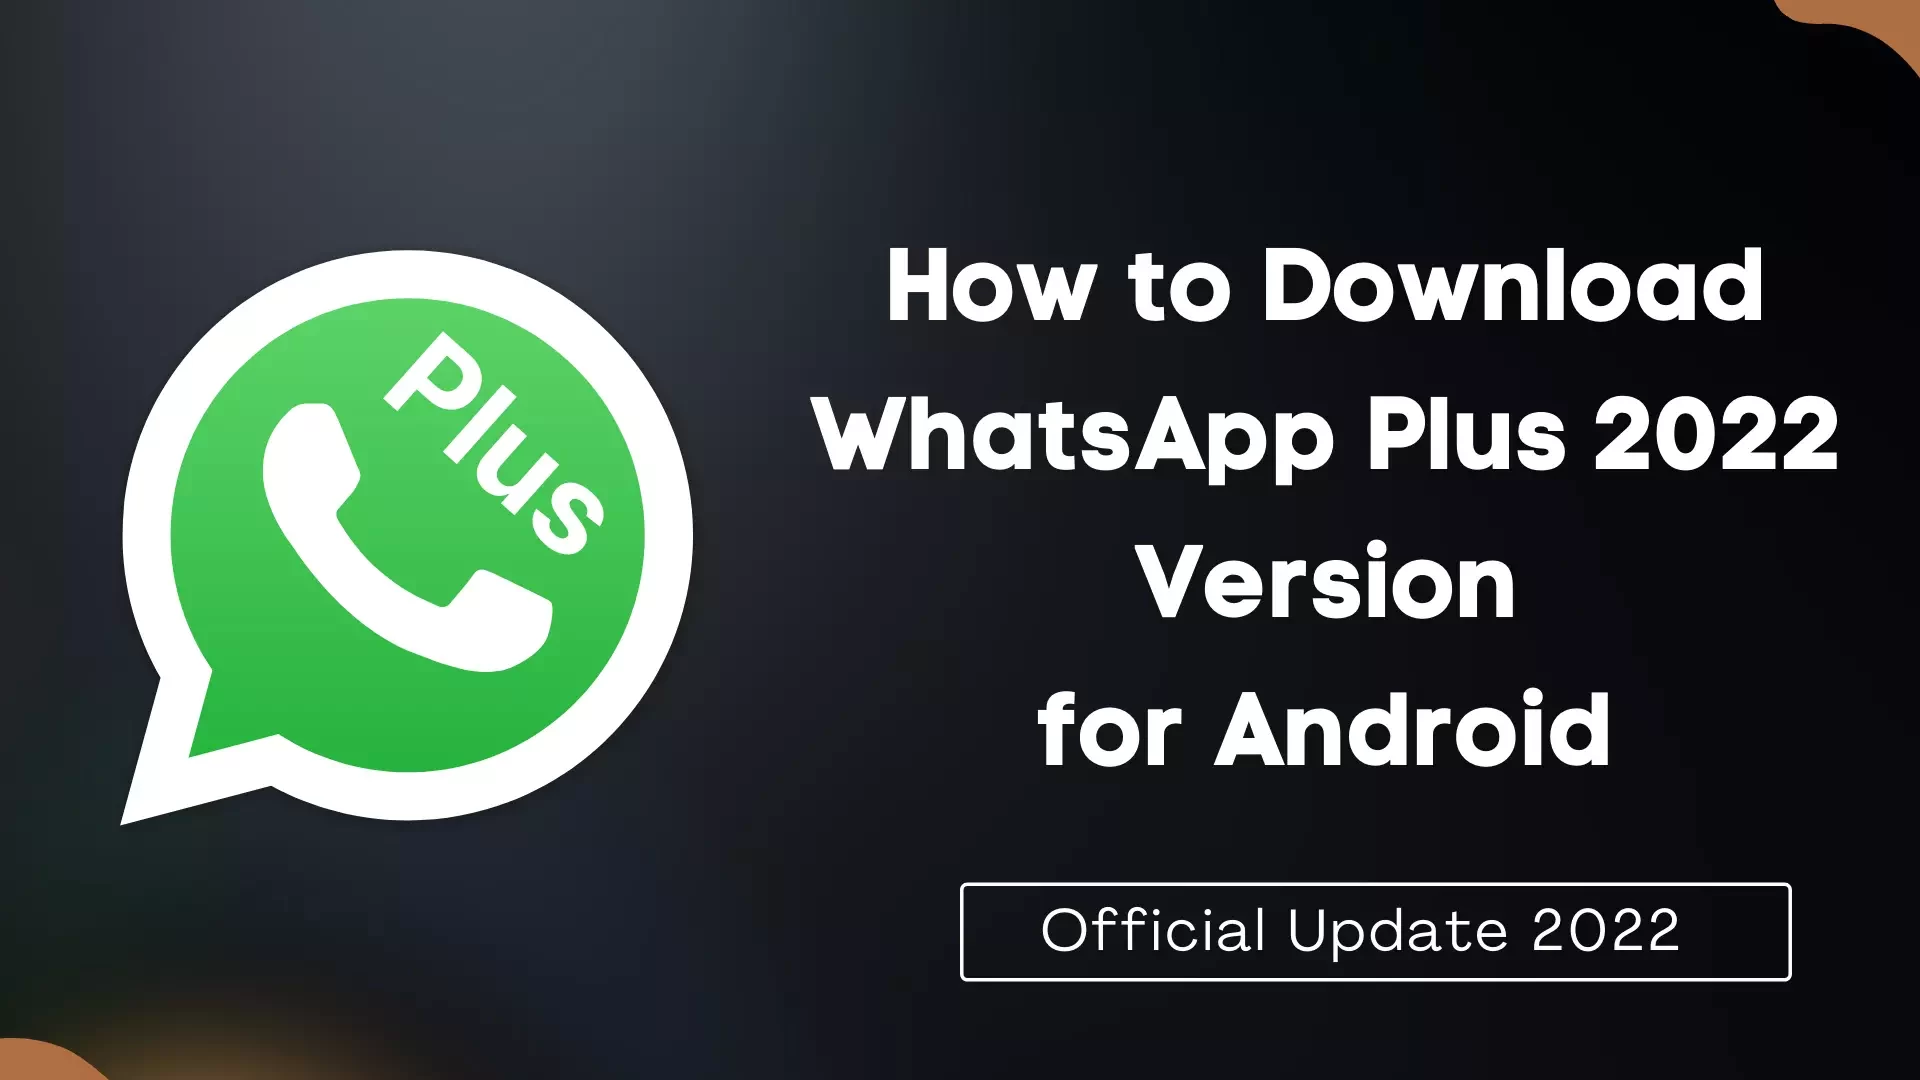 How to Download WhatsApp Plus 2022 Version Thumbnail